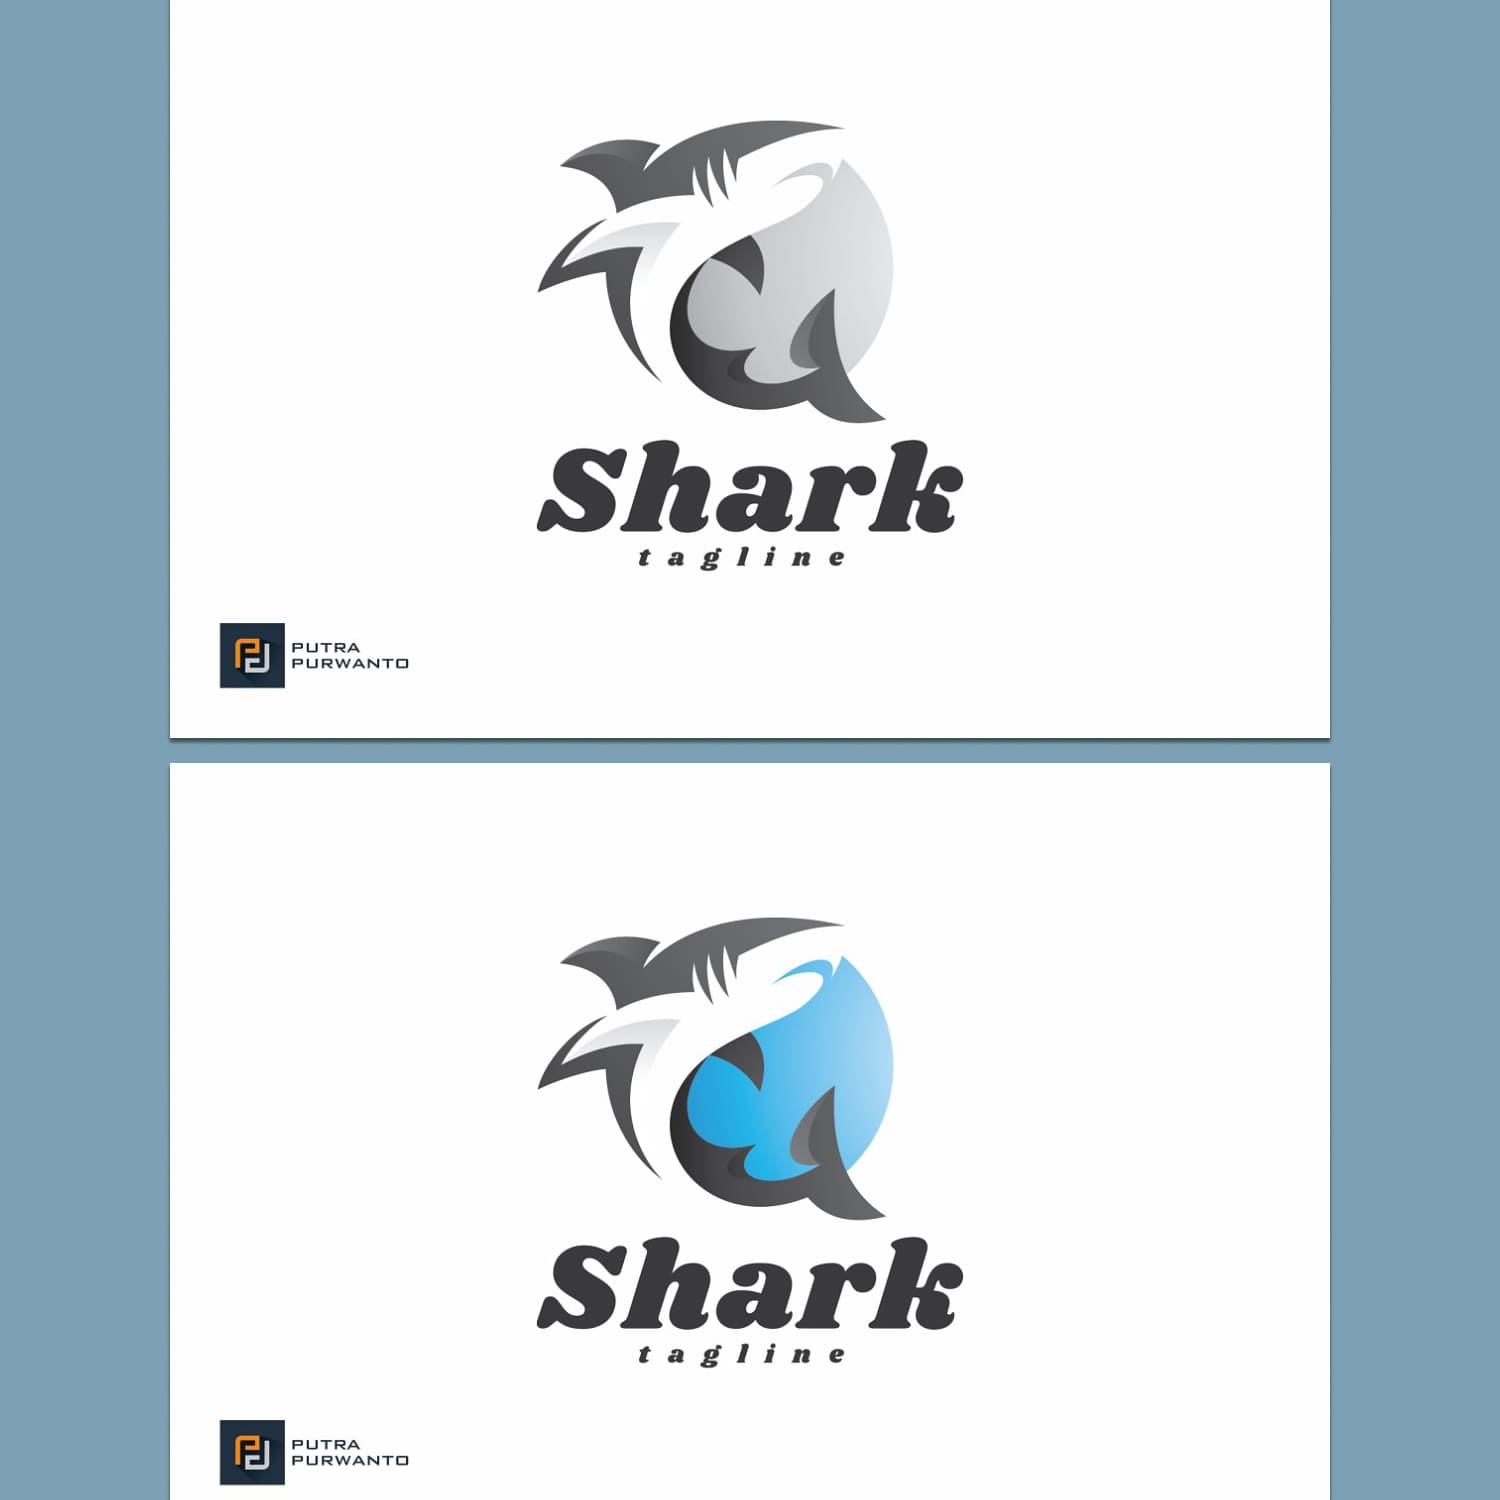 Shark - Logo Template created by putra_purwanto.